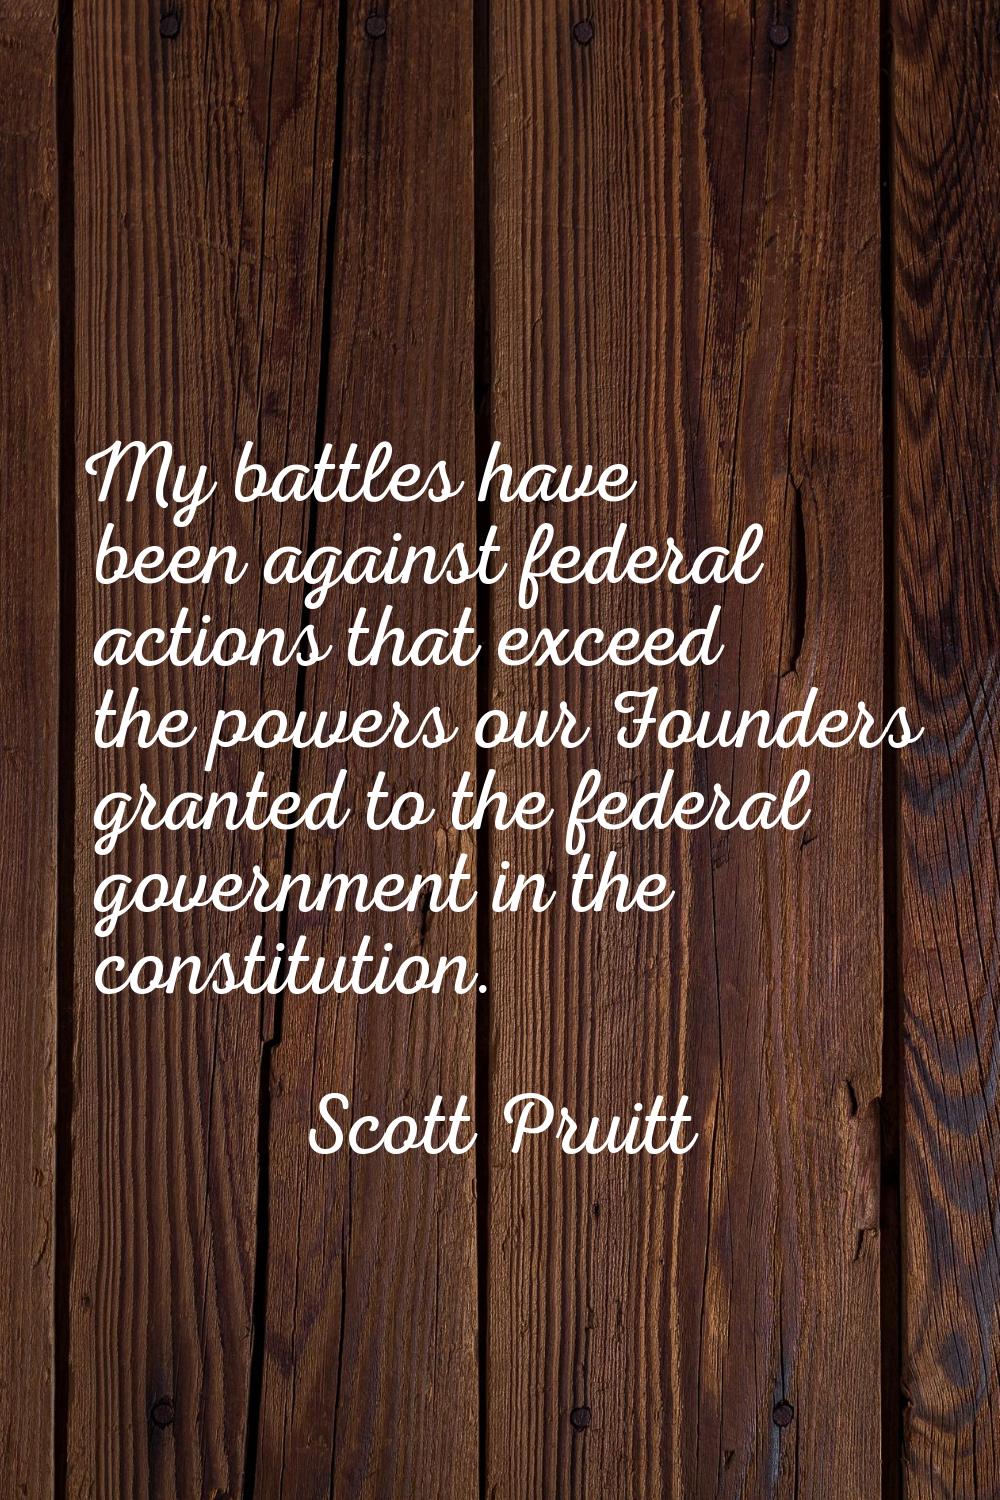 My battles have been against federal actions that exceed the powers our Founders granted to the fed